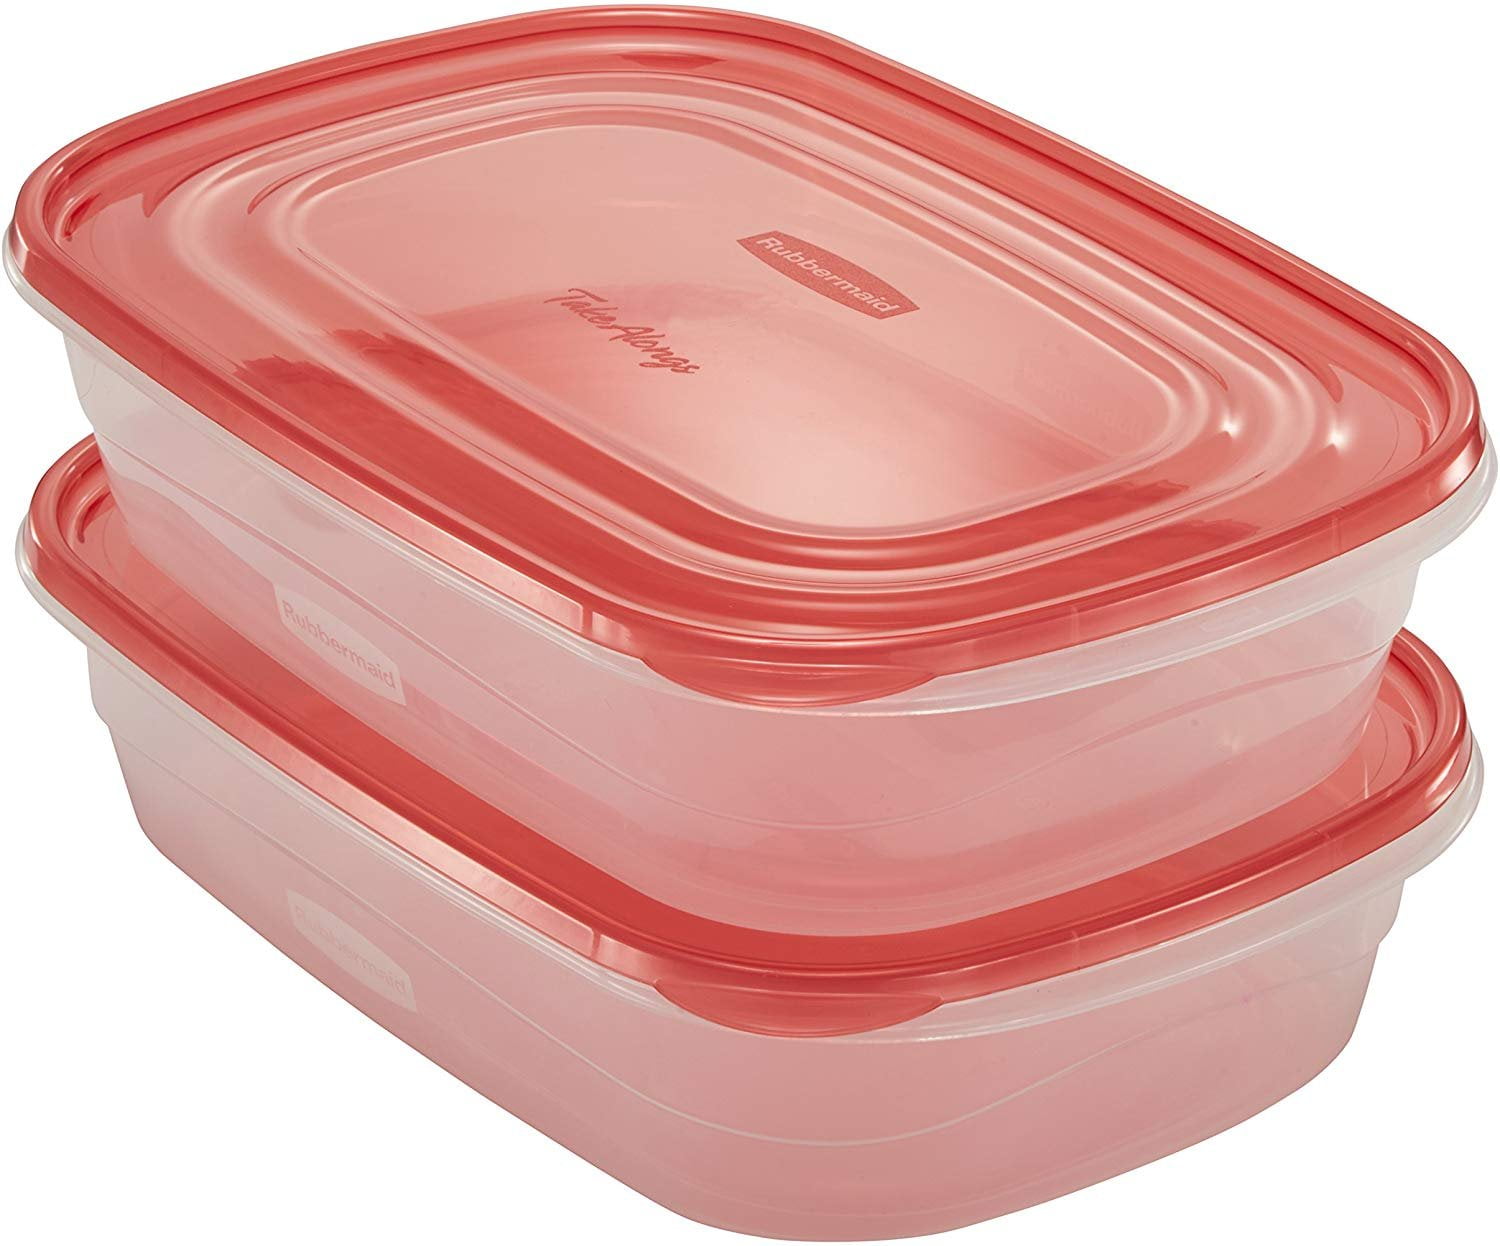 Rubbermaid TakeAlongs Large Rectangle Food Storage Containers - 2 Pack -  Clear/Red, 1 gal - Greatland Grocery